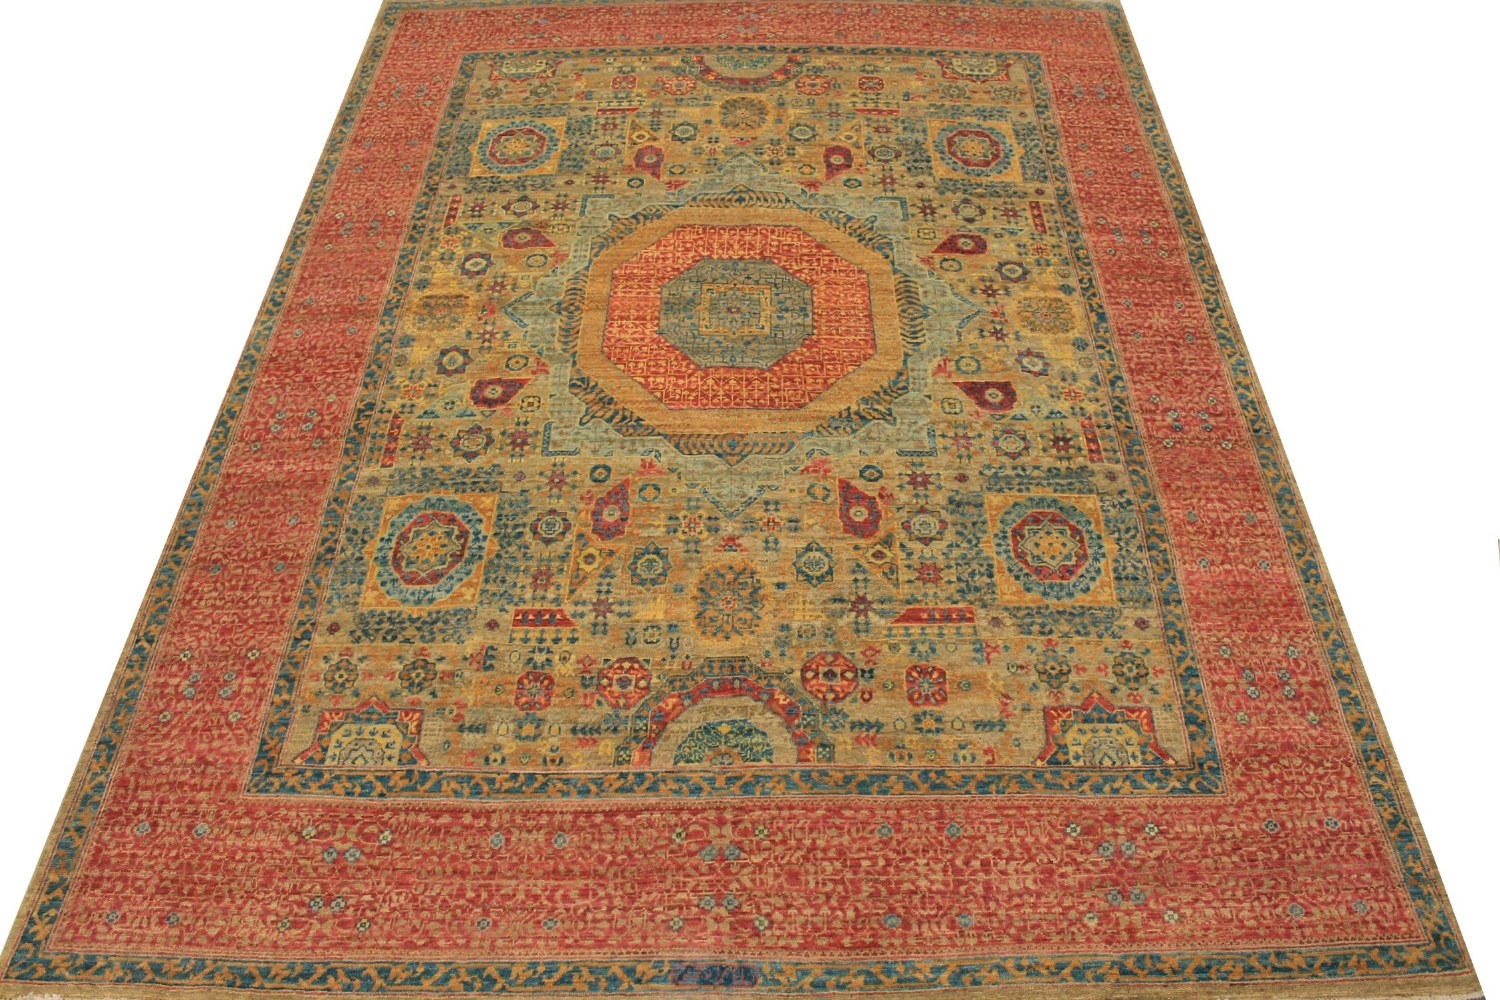 8x10 Aryana & Antique Revivals Hand Knotted Wool Area Rug - MR028848